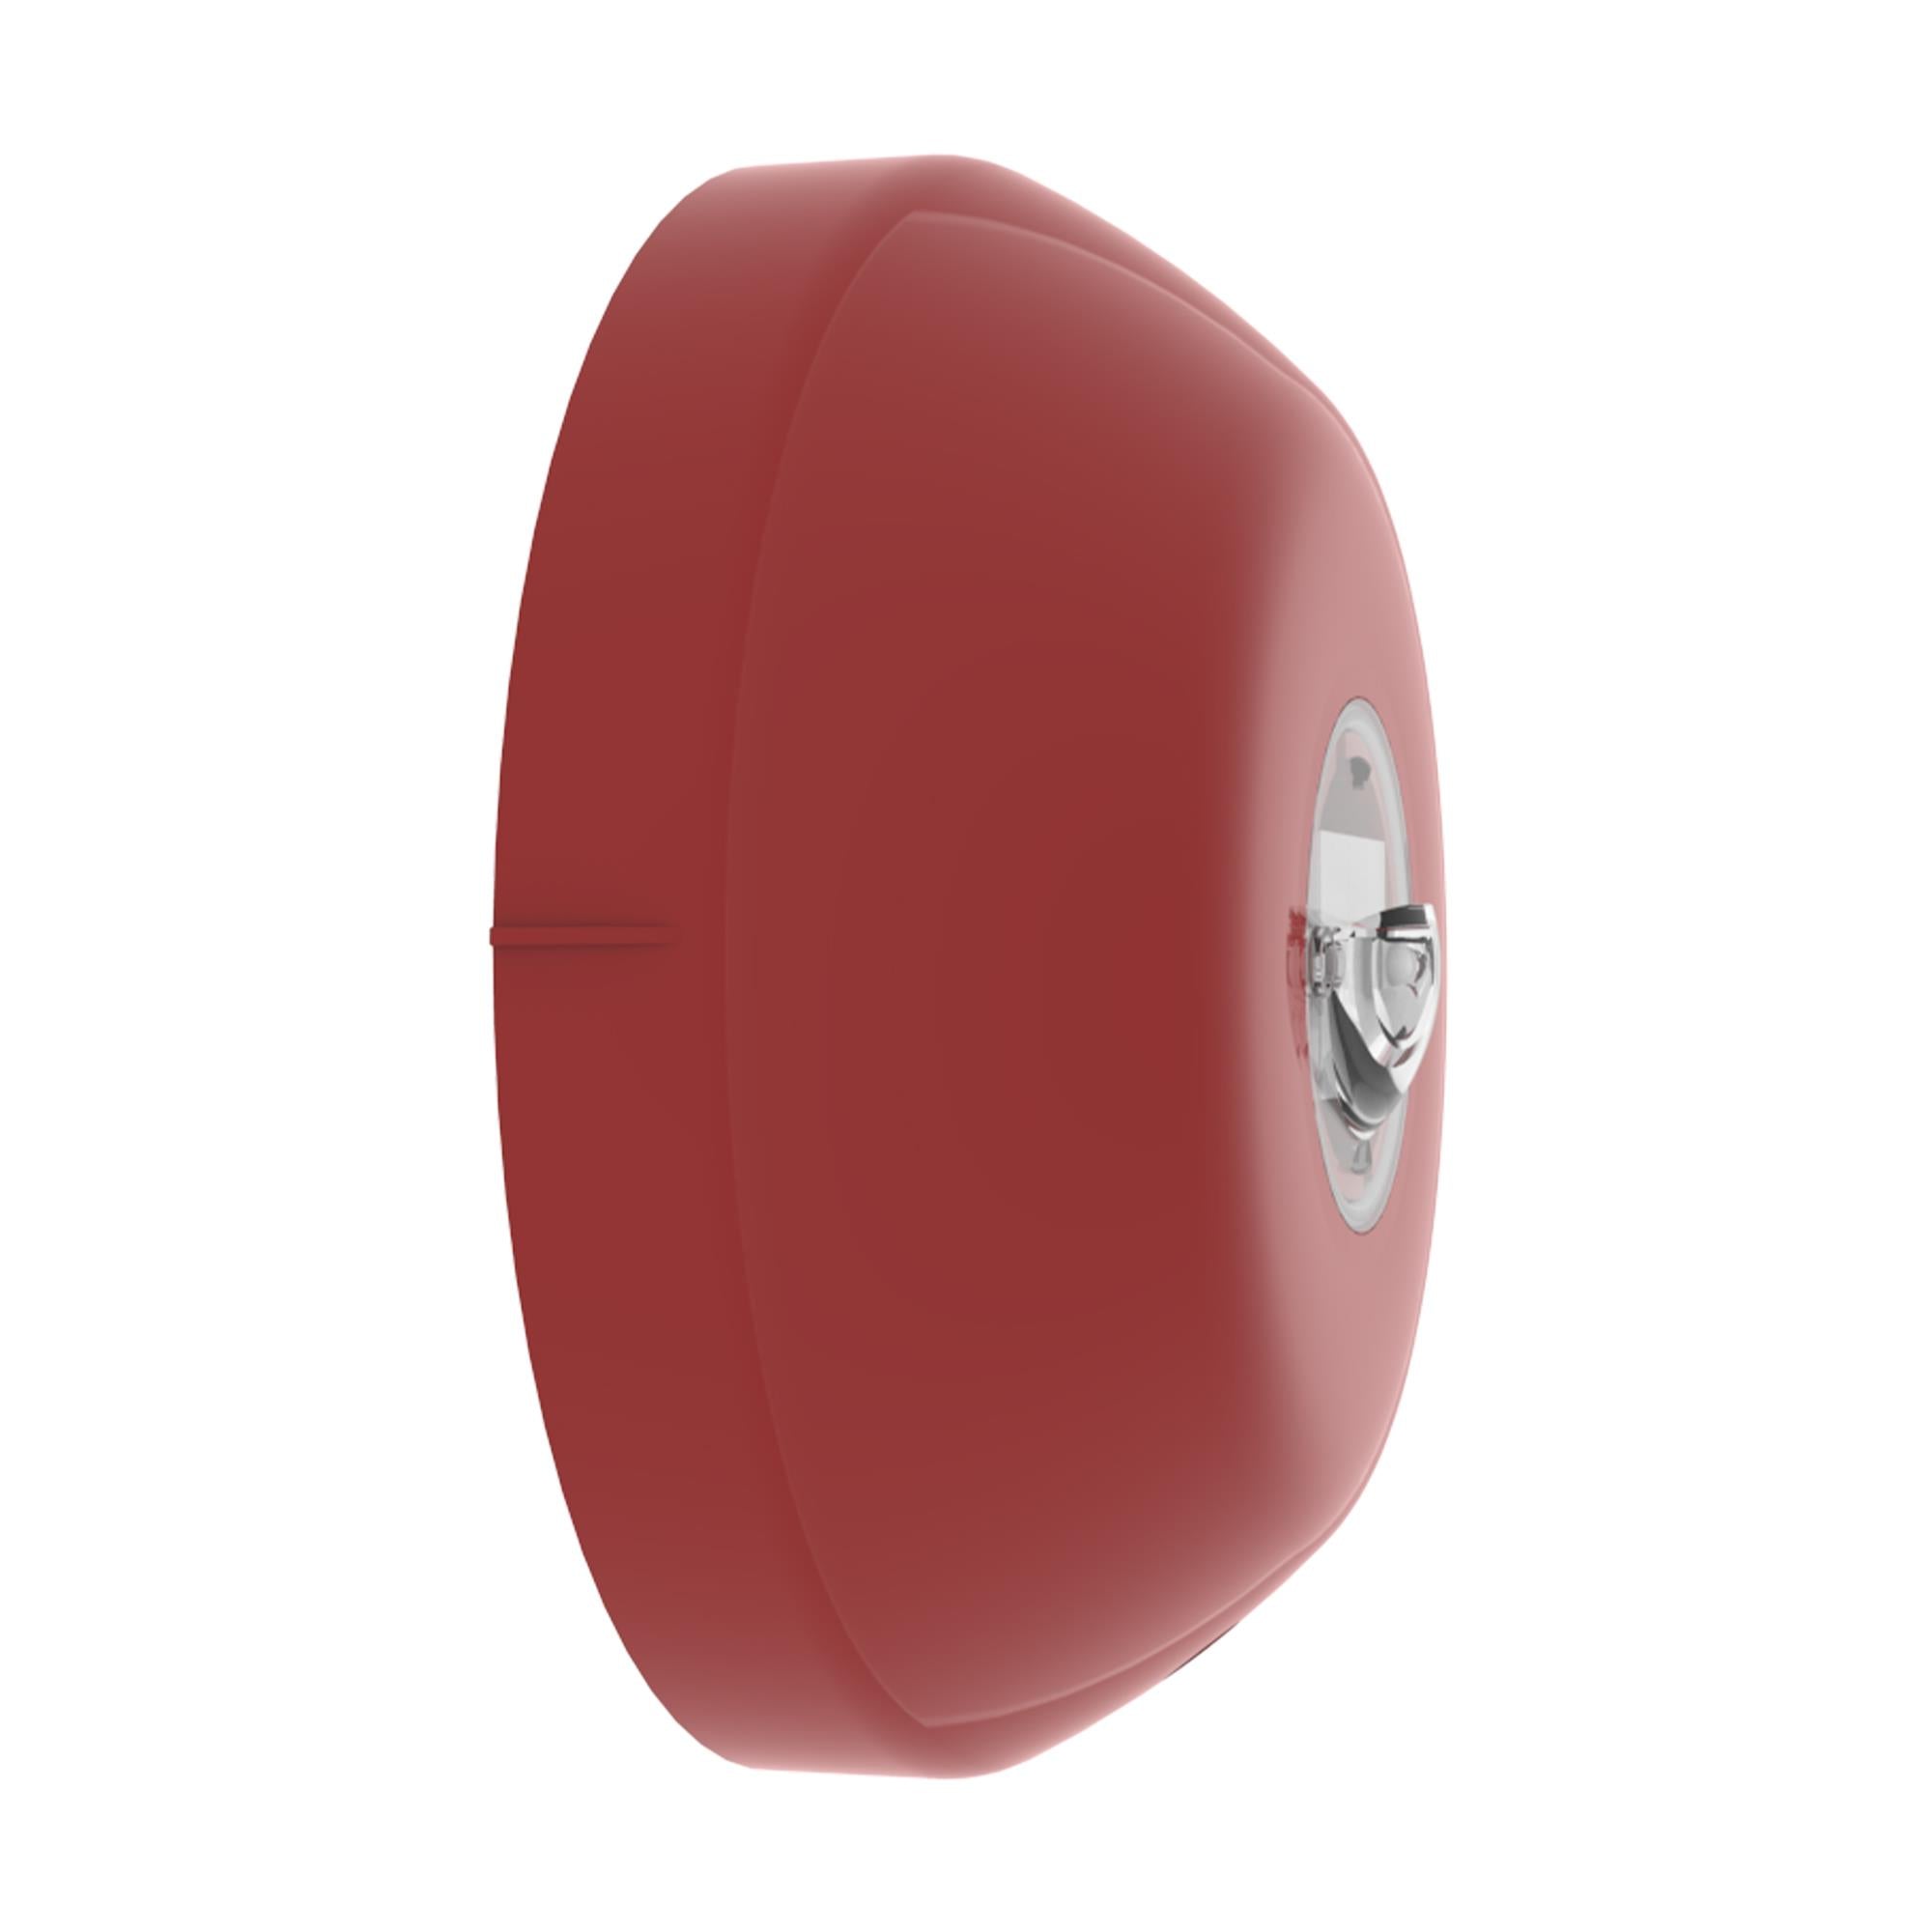 CHQ-WB(RED)/RL Wall Beacon - Red case, red LEDs - Fire Trade Supplies